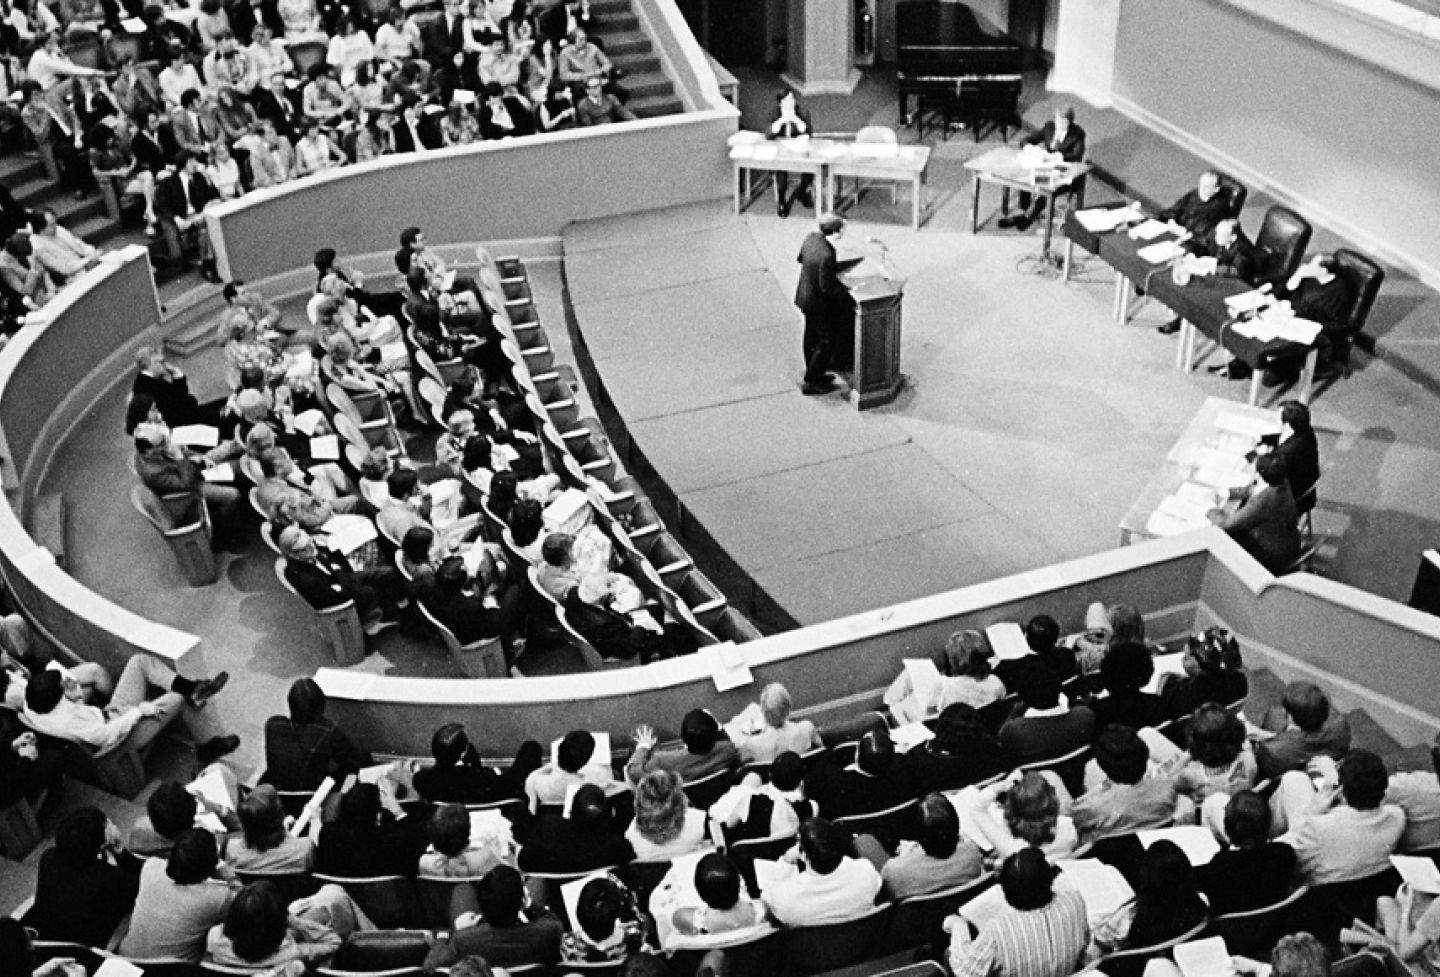 In 1975, the William Minor Lile Moot Court competition took place in Old Cabell Hall on Main Grounds. 